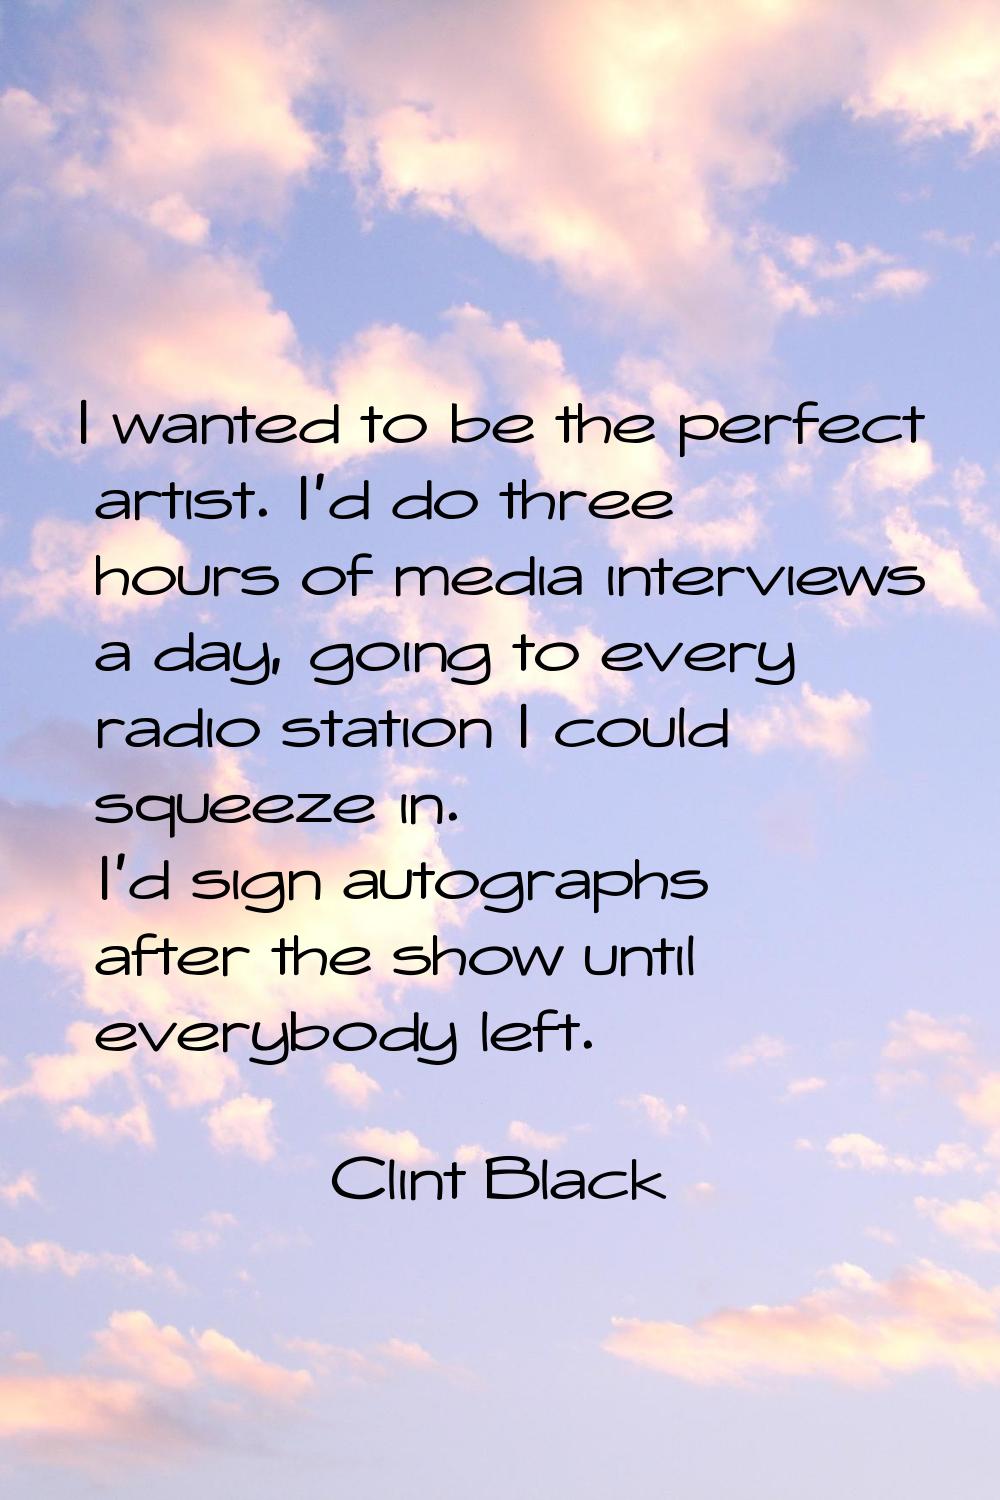 I wanted to be the perfect artist. I'd do three hours of media interviews a day, going to every rad